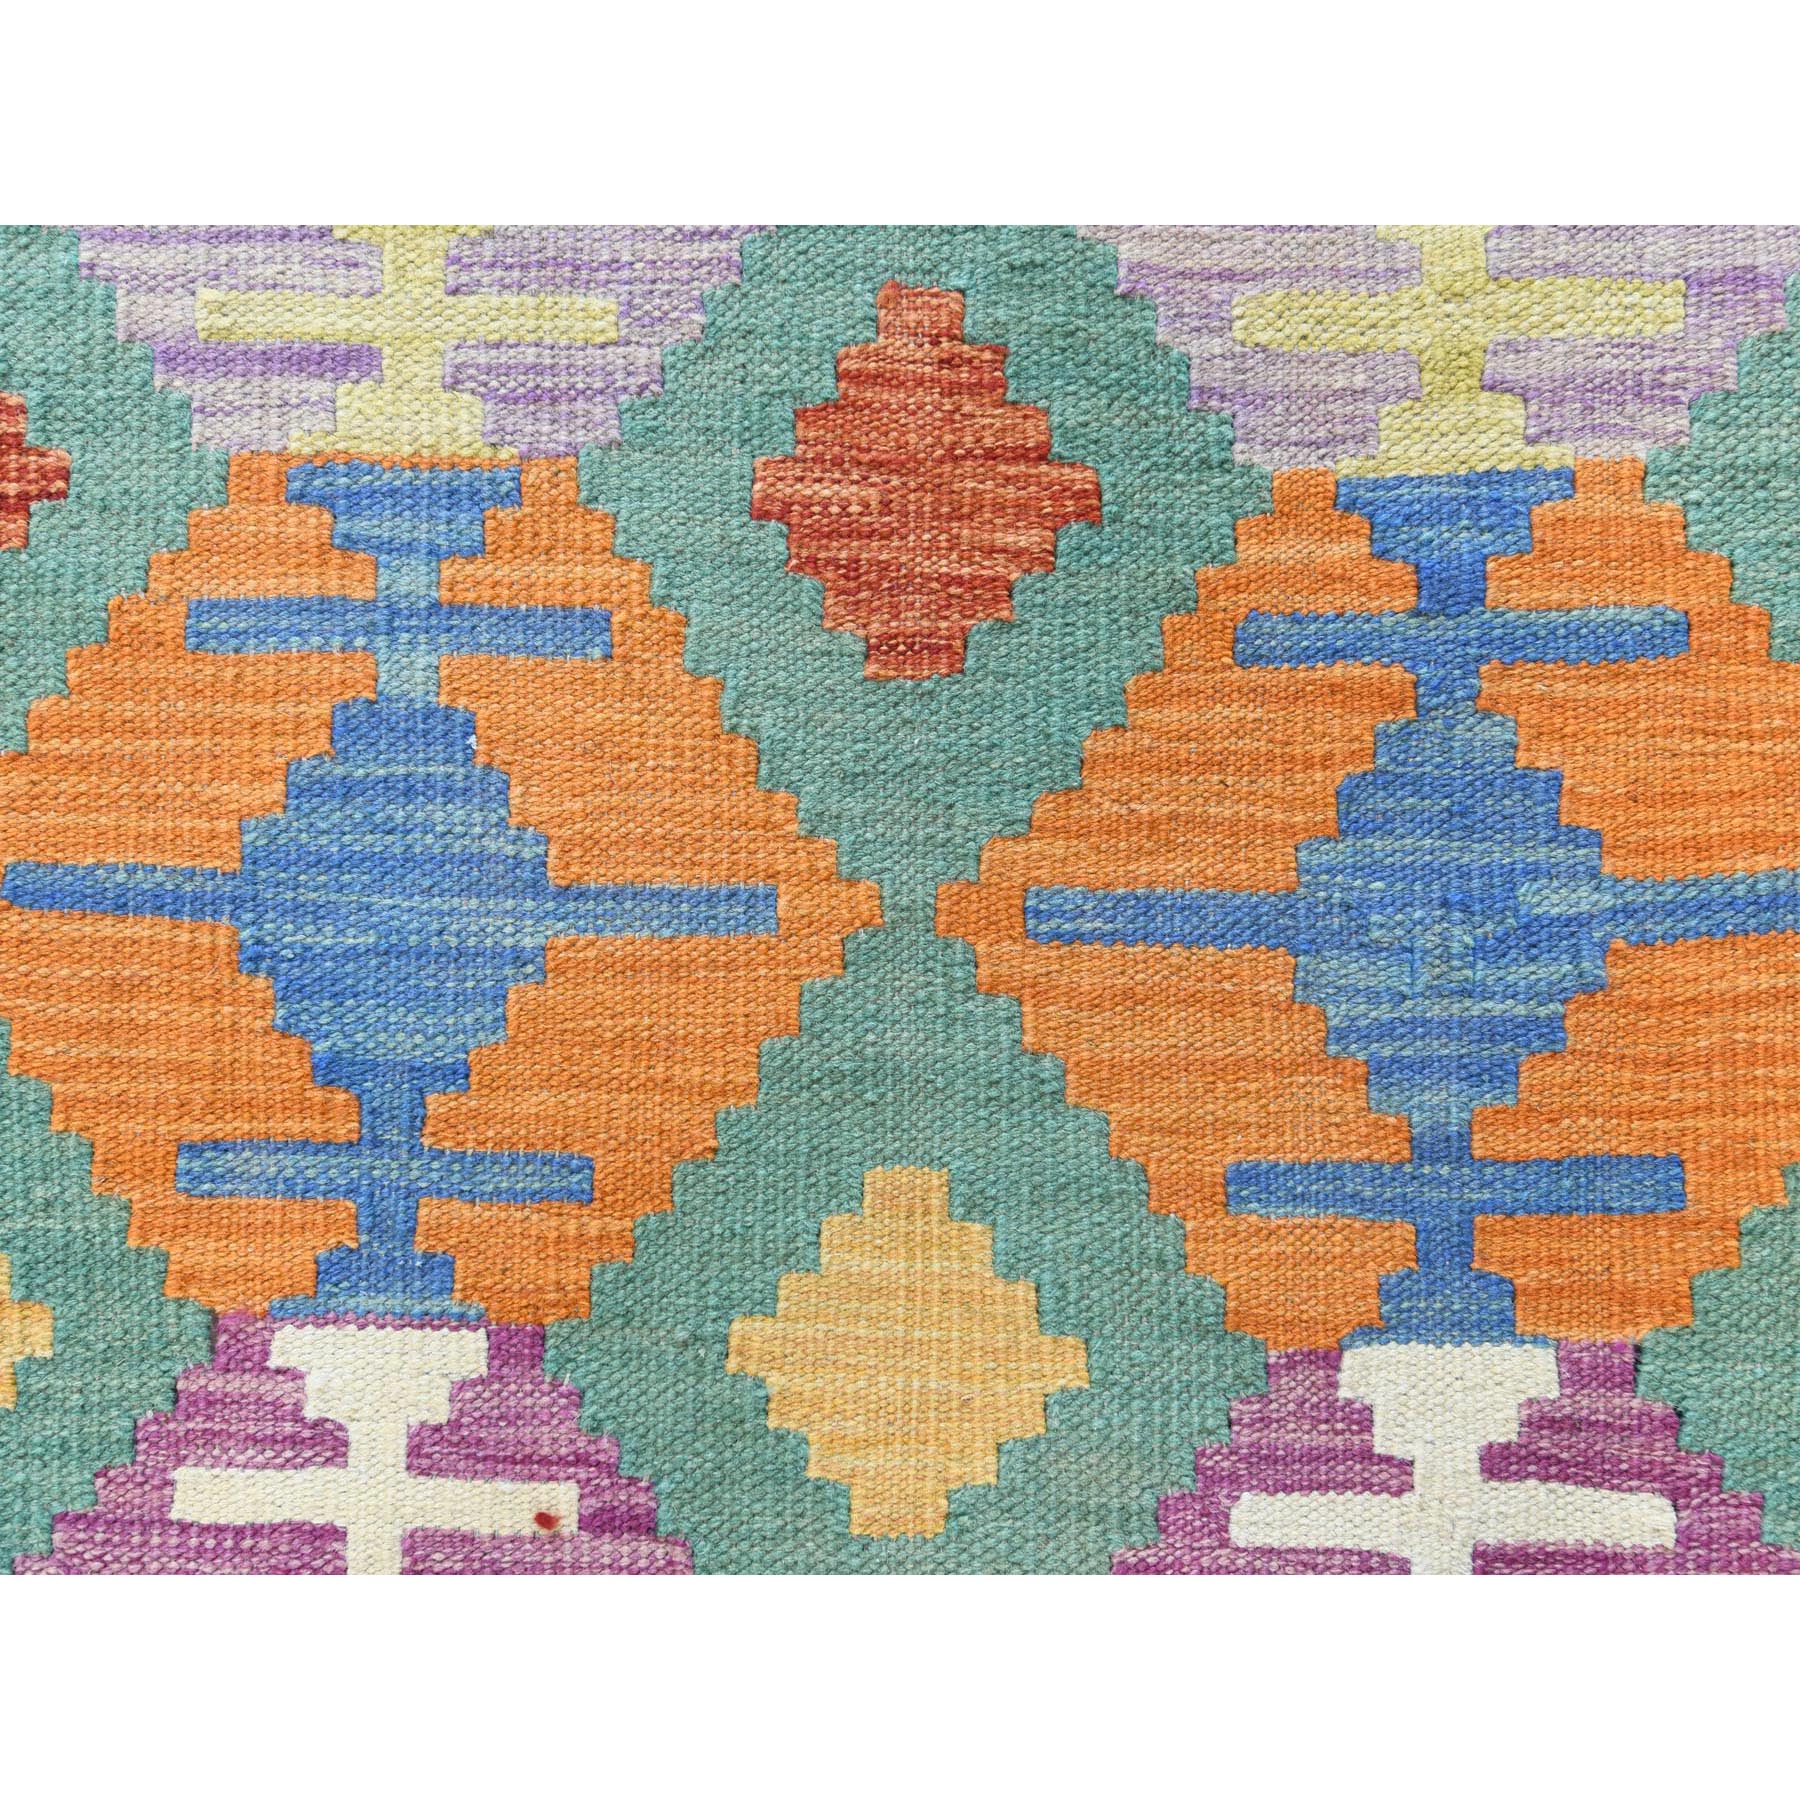 2'8"x16' Colorful, Hand Woven, Afghan Kilim with Geometric Design, Pure Wool, Vegetable Dyes, Flat Weave, Reversible XL Runner Oriental Rug 